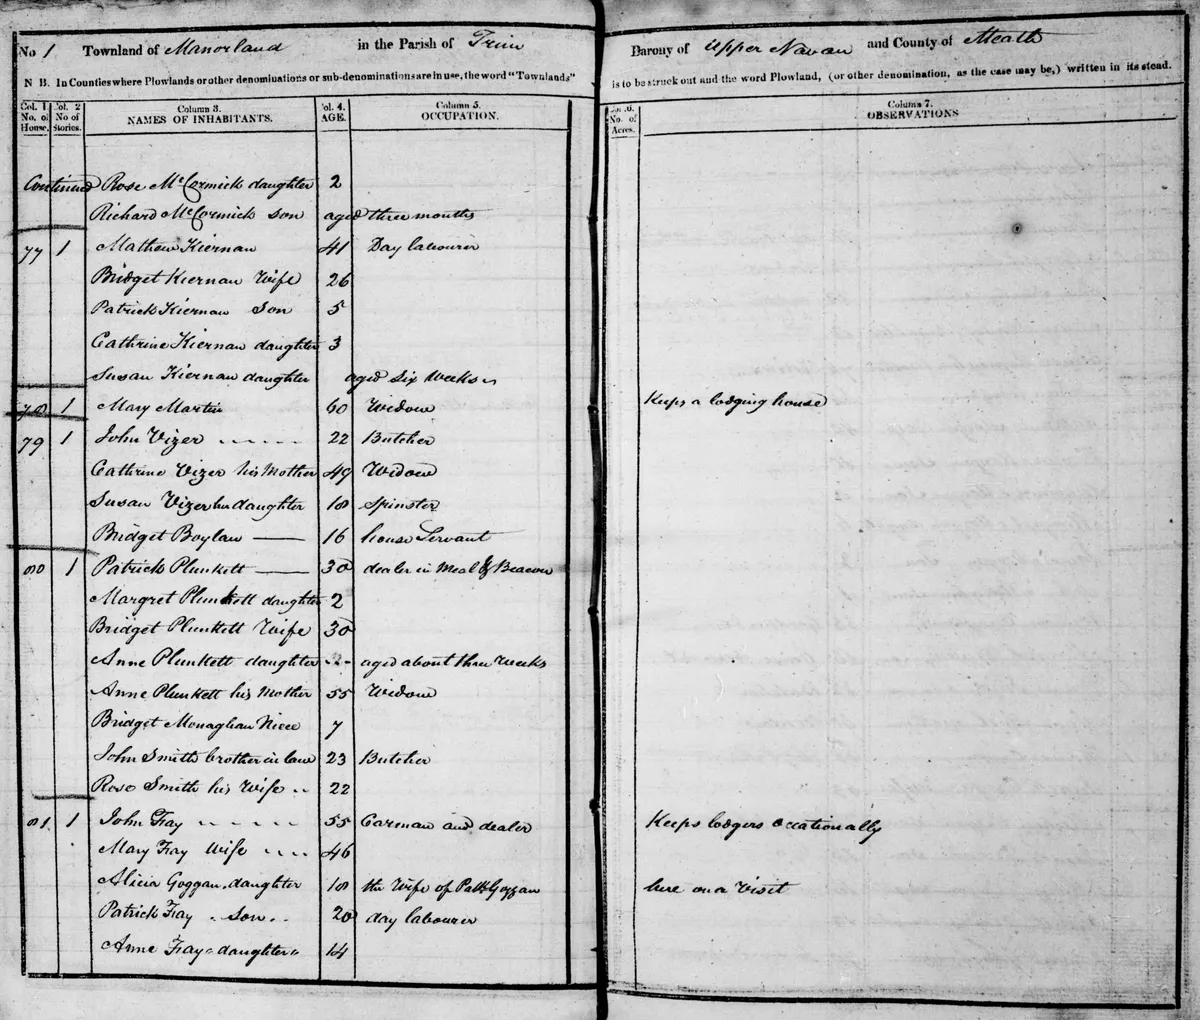 Surviving Irish 1821 census records are now freely available online